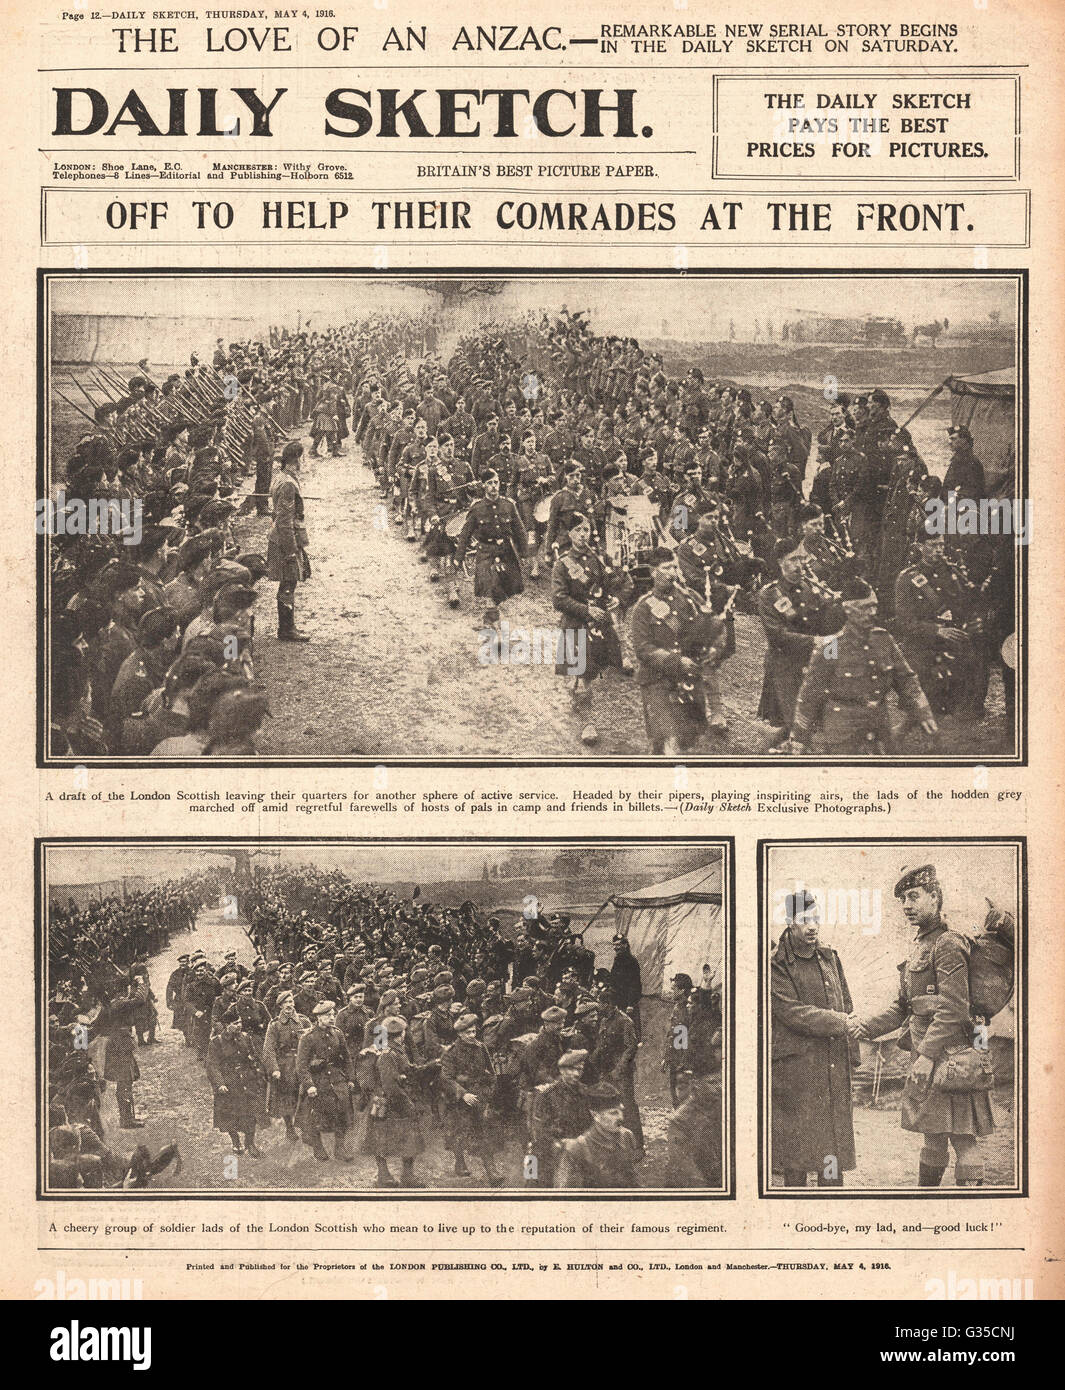 1916 Daily Sketch London Scottish Troops Stock Photo